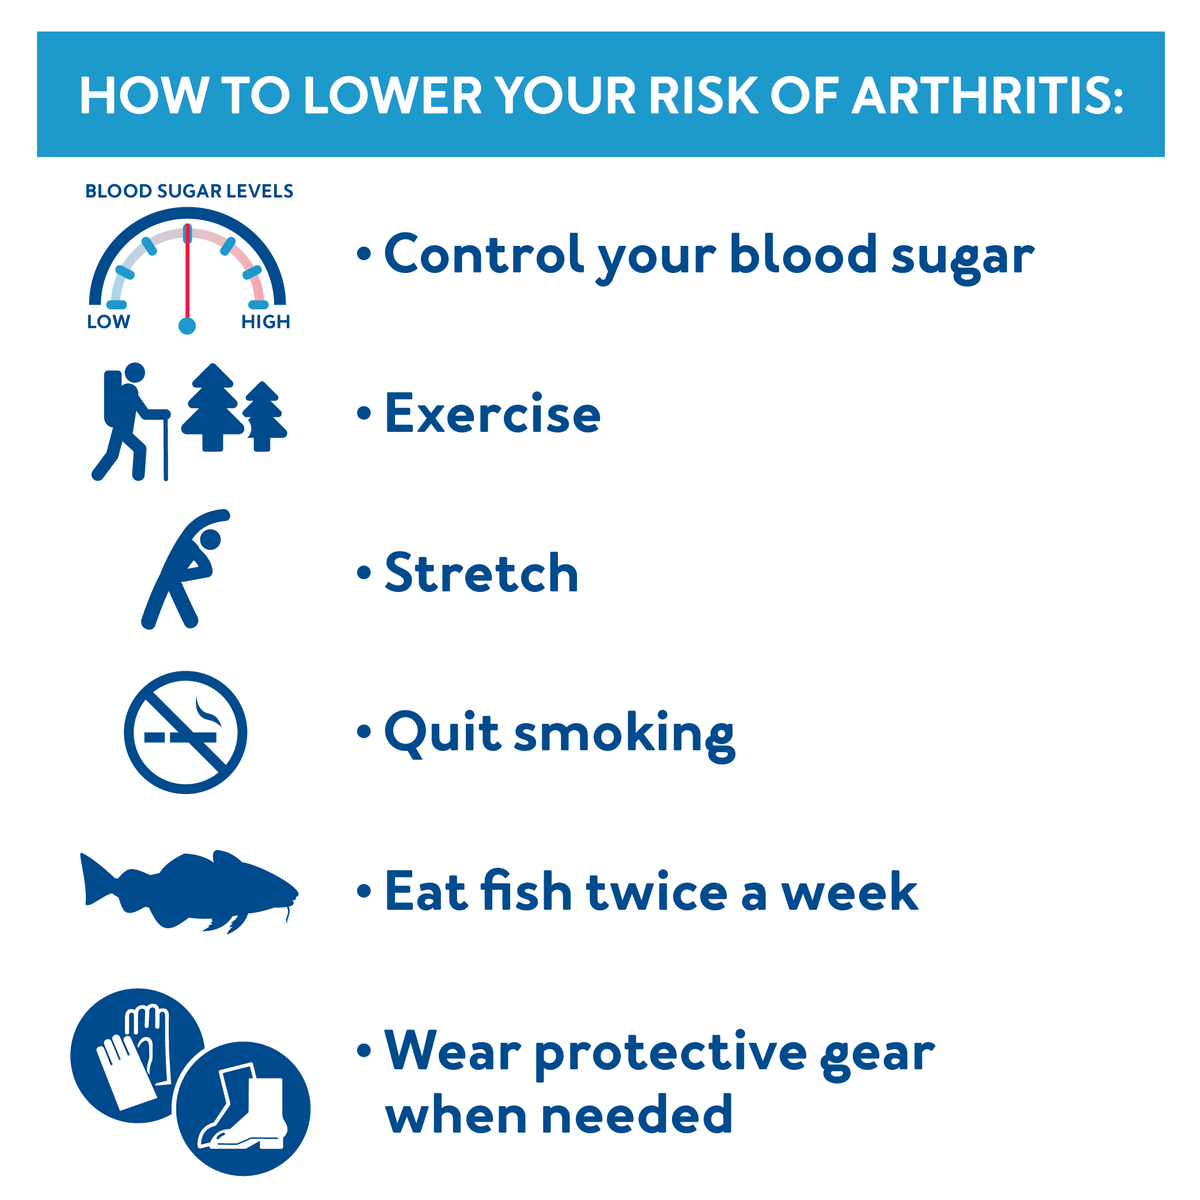 How to Lower Your Risk of Arthritis : Further details are provided next to